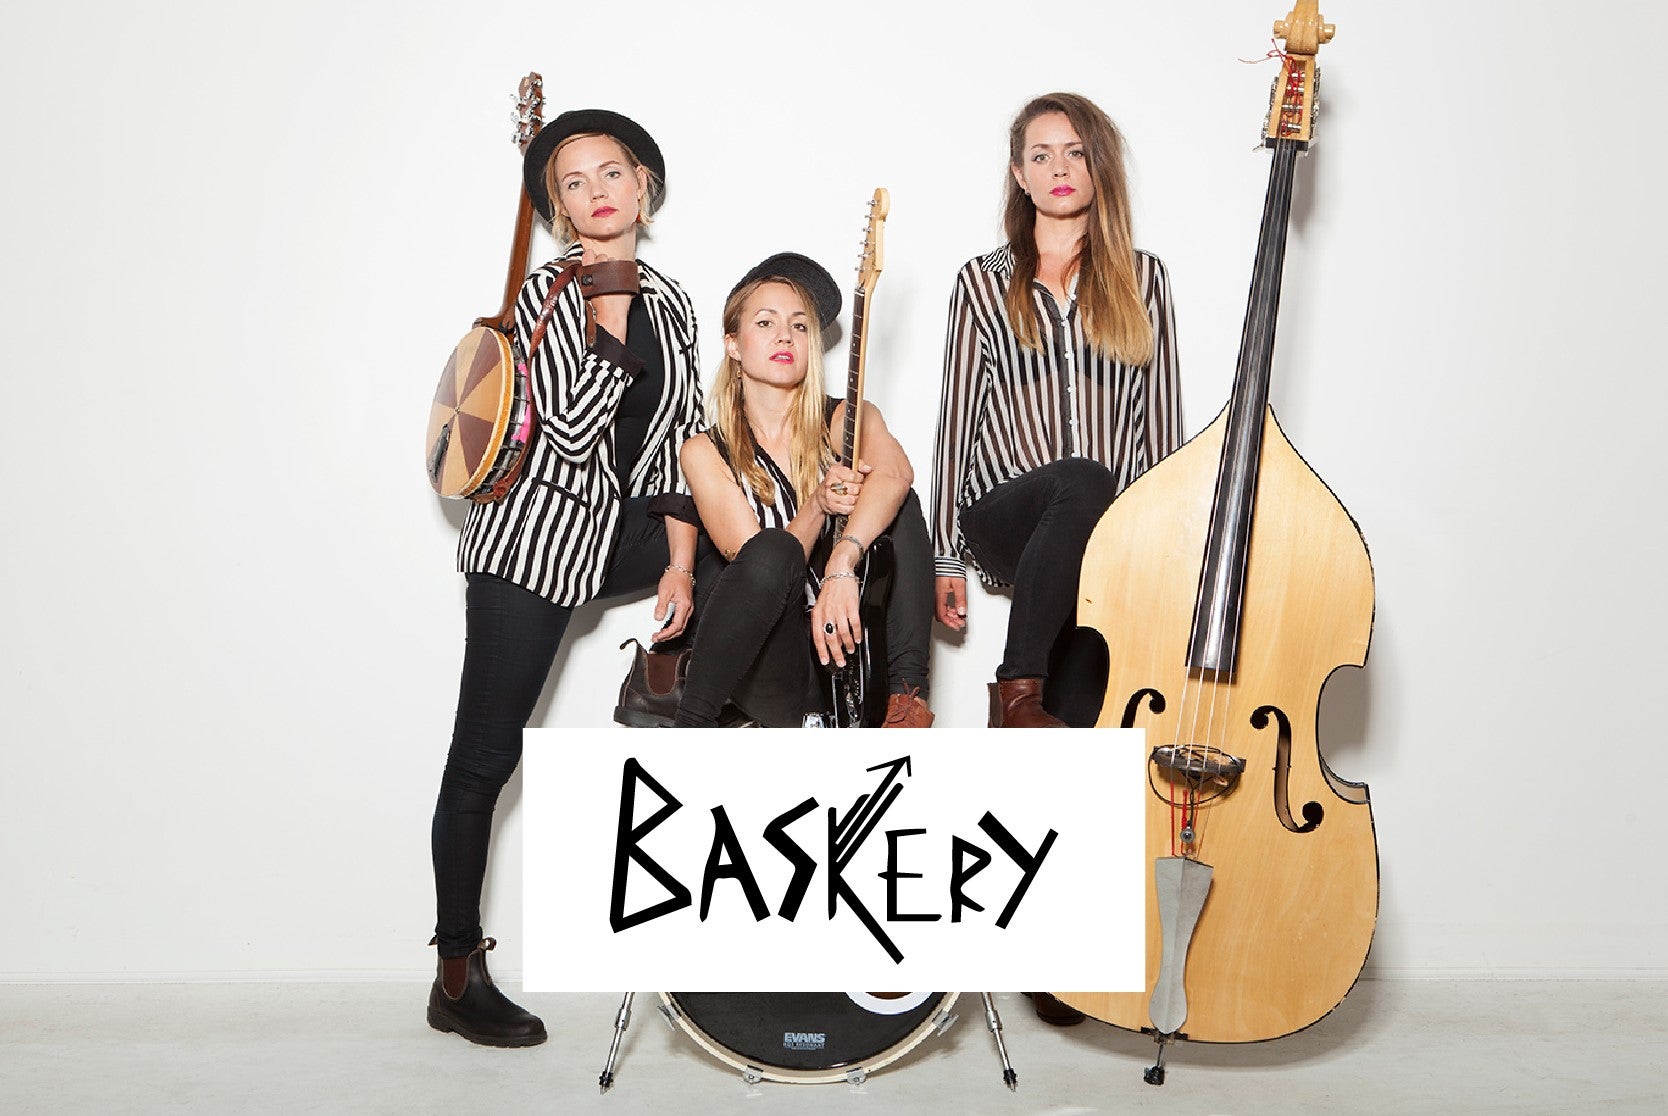 Baskery - The Musician (Leicester)